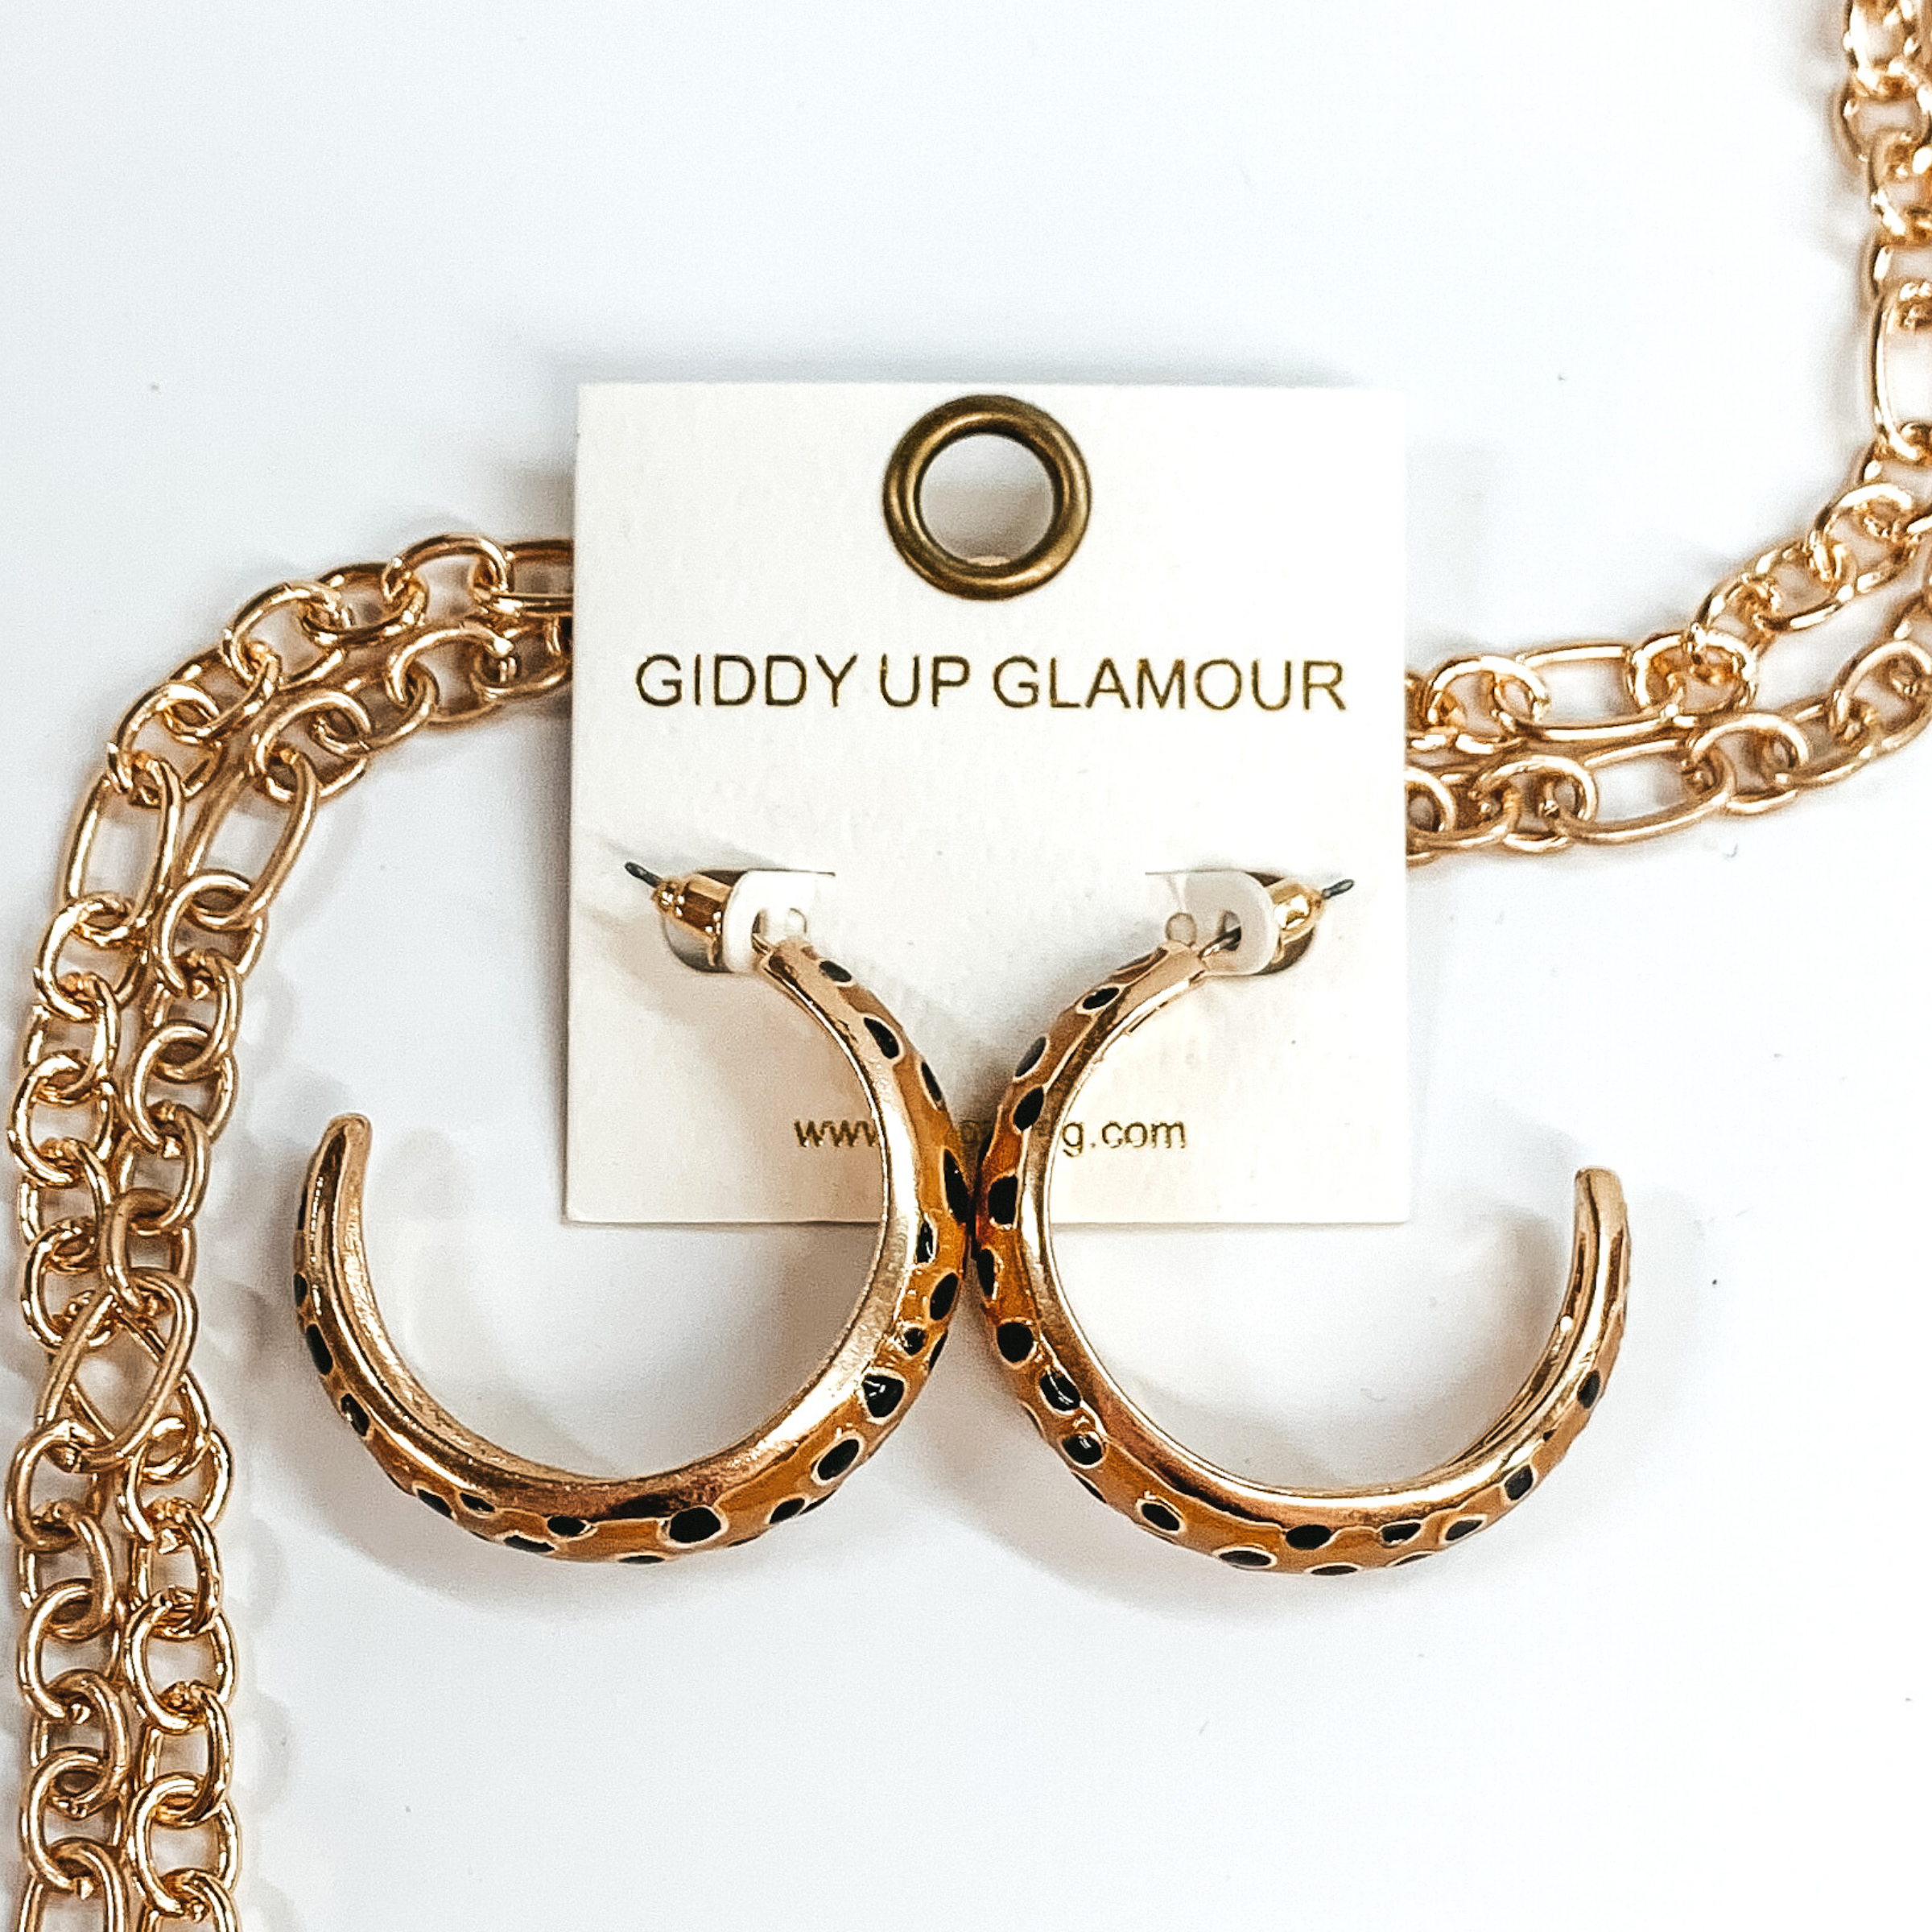 Large, gold outline, tan hoop earrings with black cheetah print.These earrings are pictured on a white earrings holder, laying on top of gold chains on a white background.